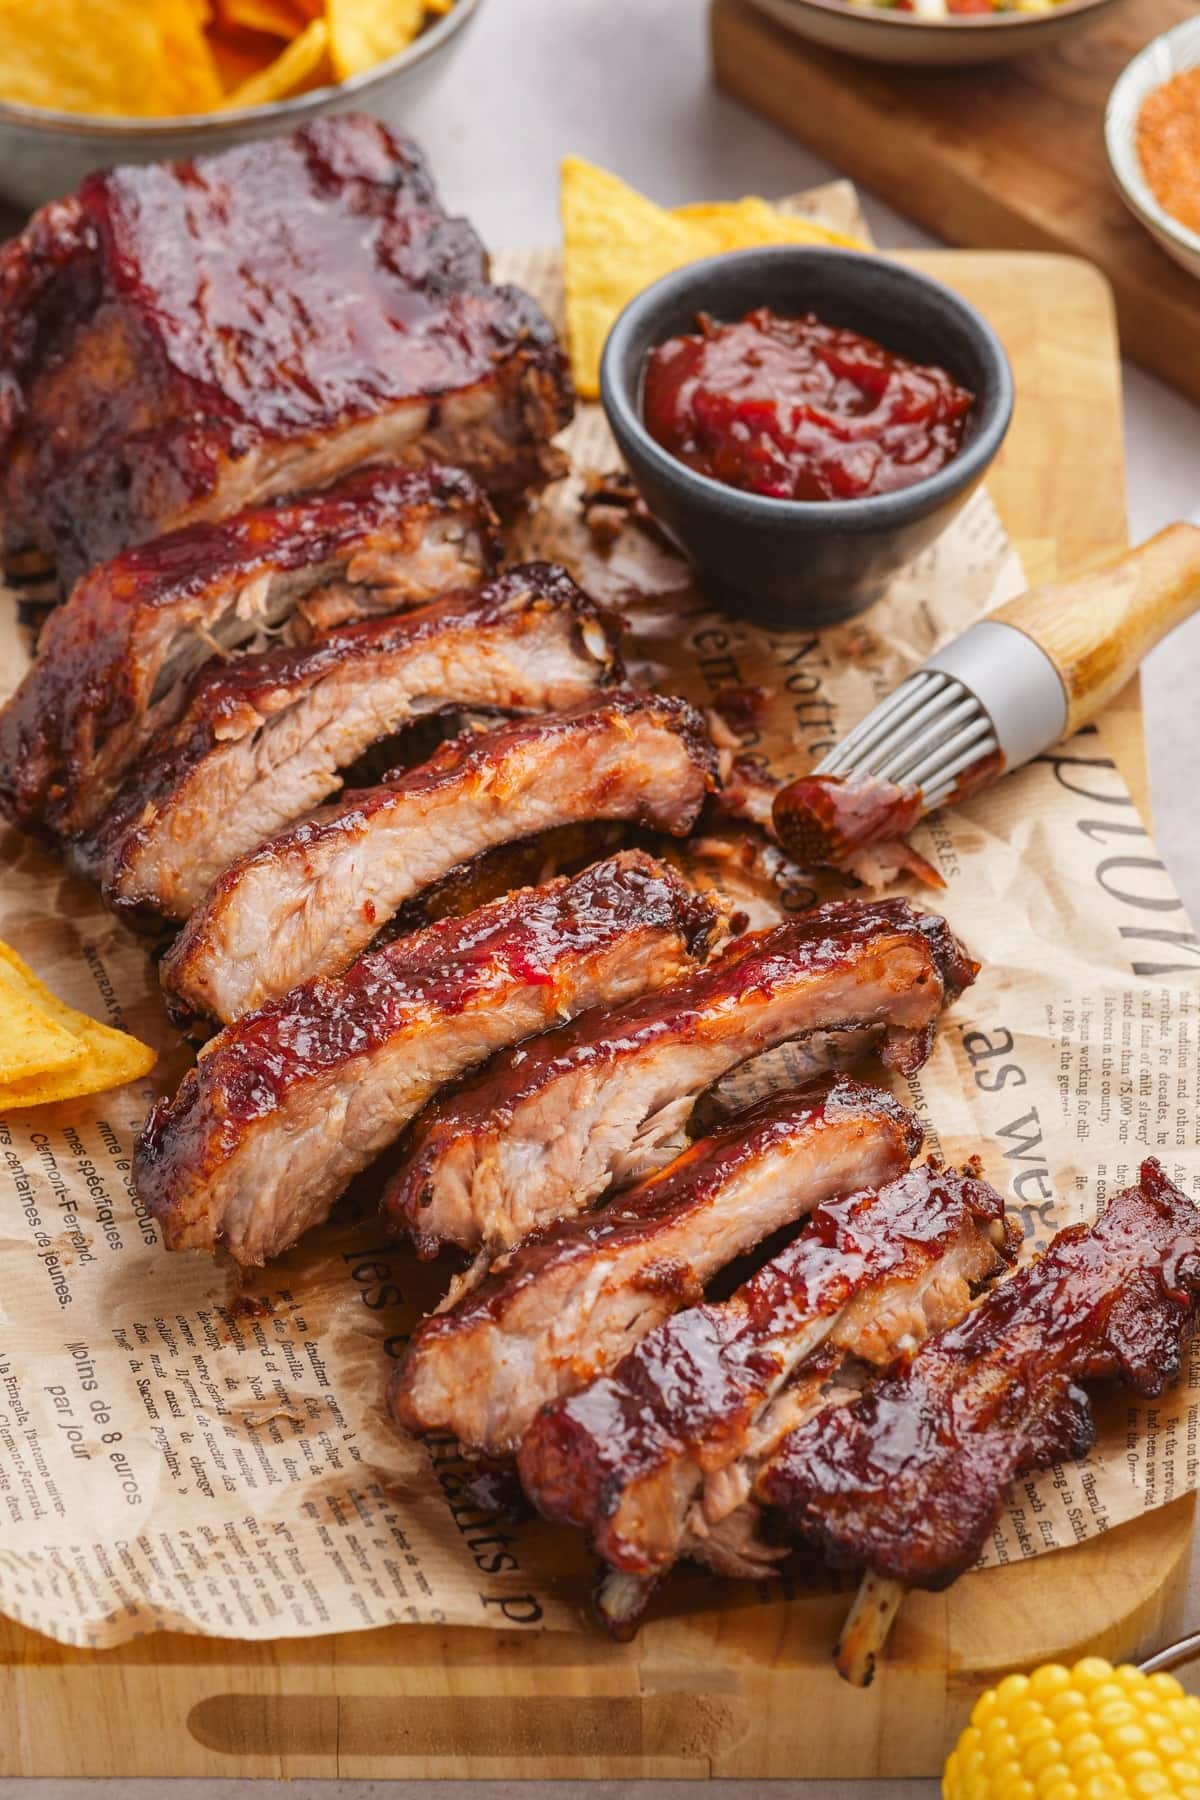 oven baked ribs sliced on serving board